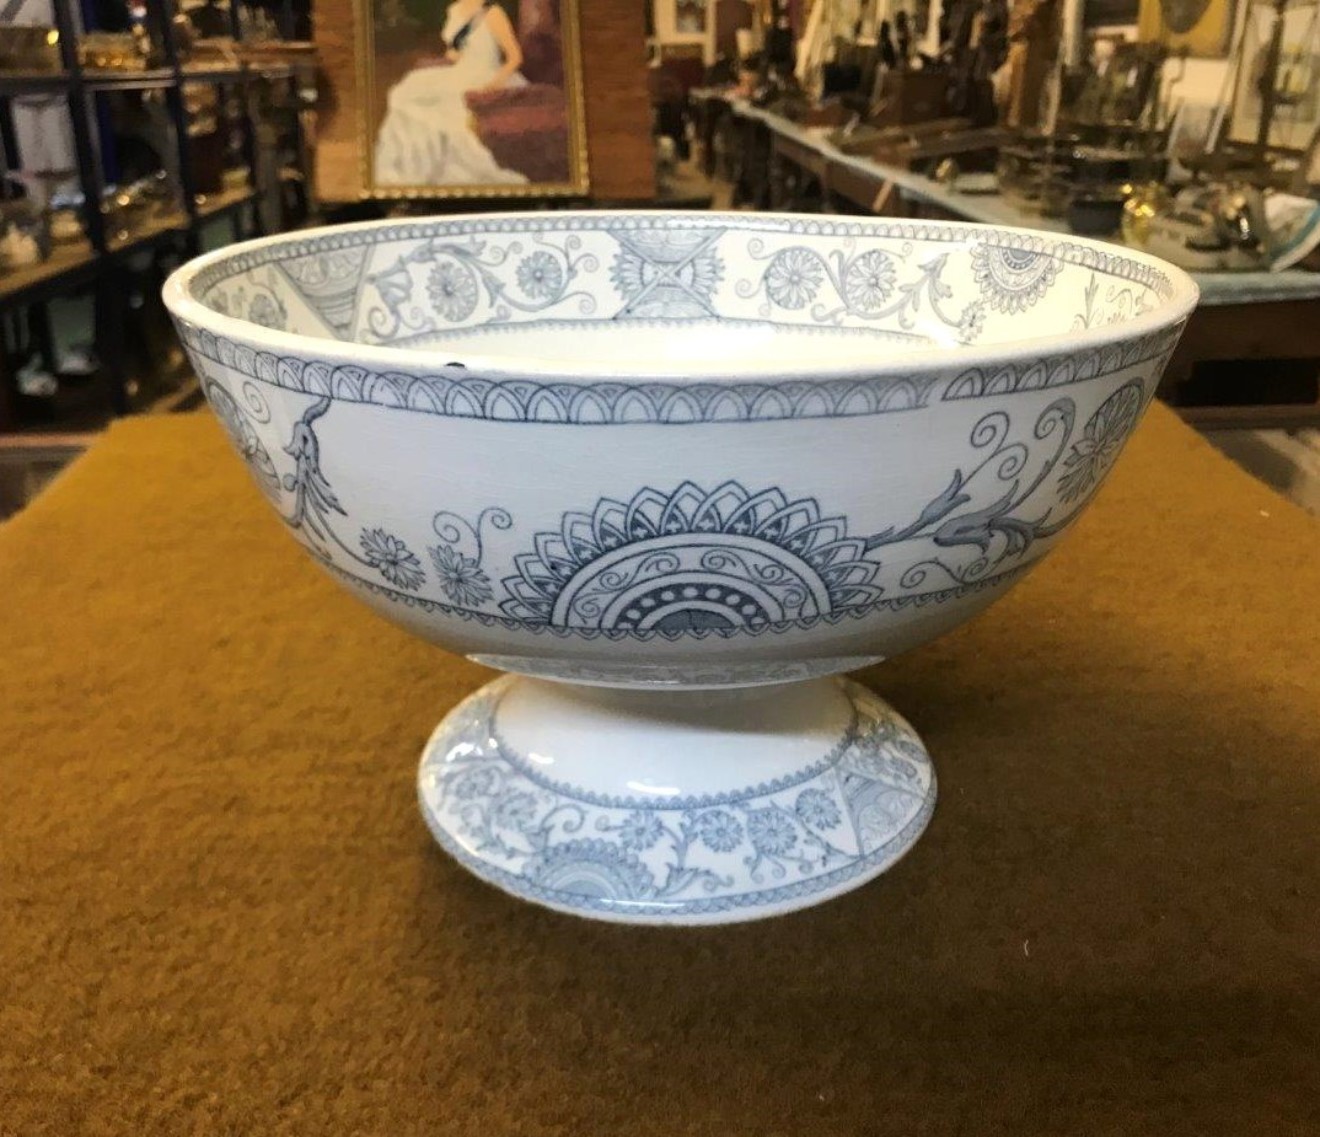 Antique Bells Pottery "Blythswood" Pattern Punch Bowl Grey / White Geometric Floral Pattern